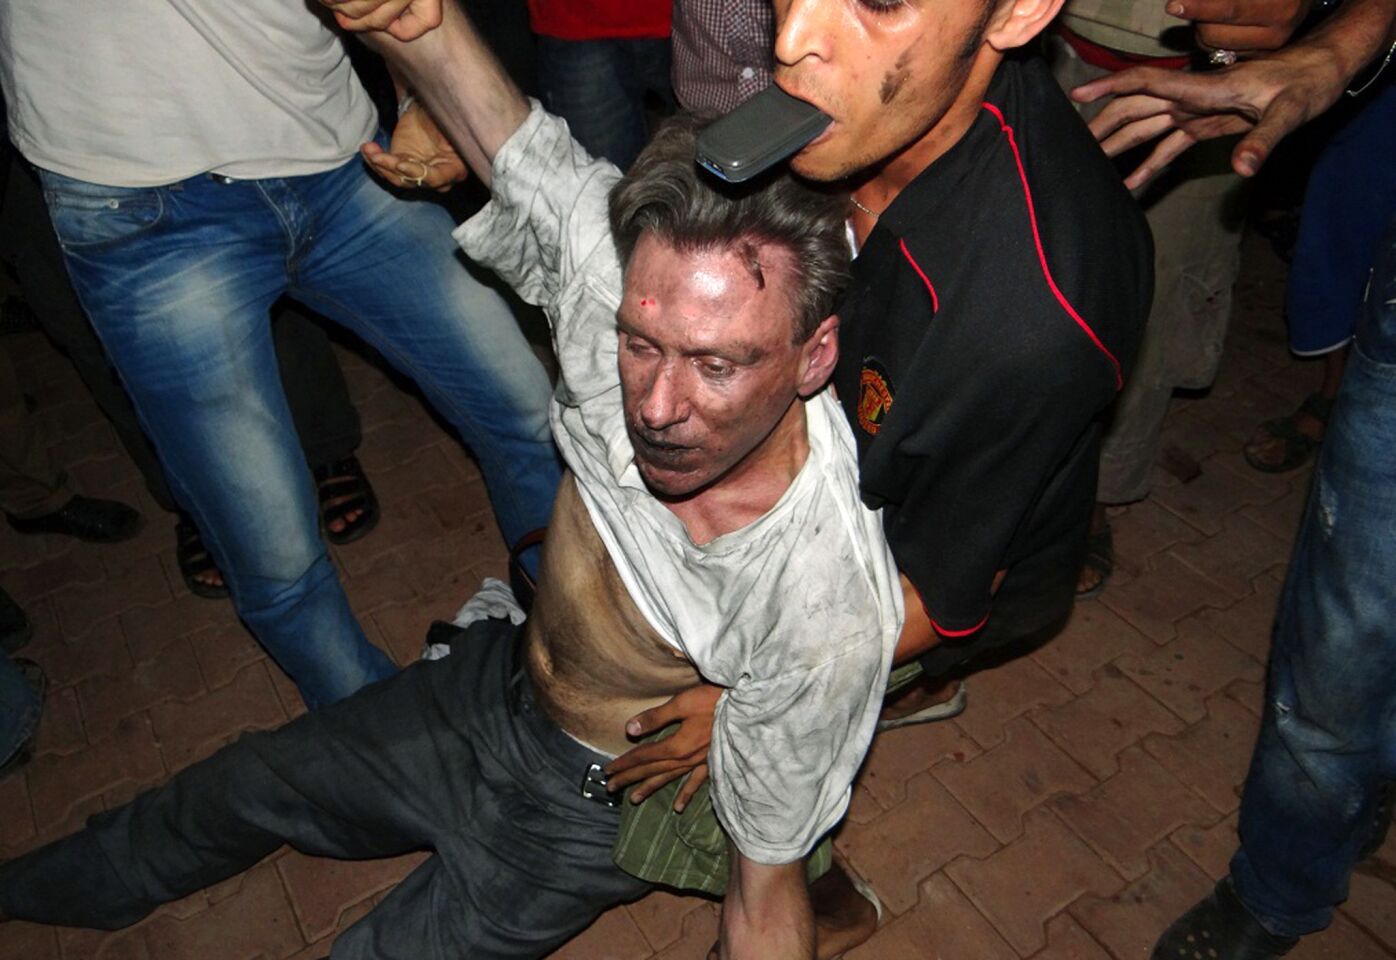 Libyan civilians help an injured man, identified by eyewitnesses as U.S. Ambassador to Libya J. Christopher Stevens, at the U.S. consulate compound in Benghazi.